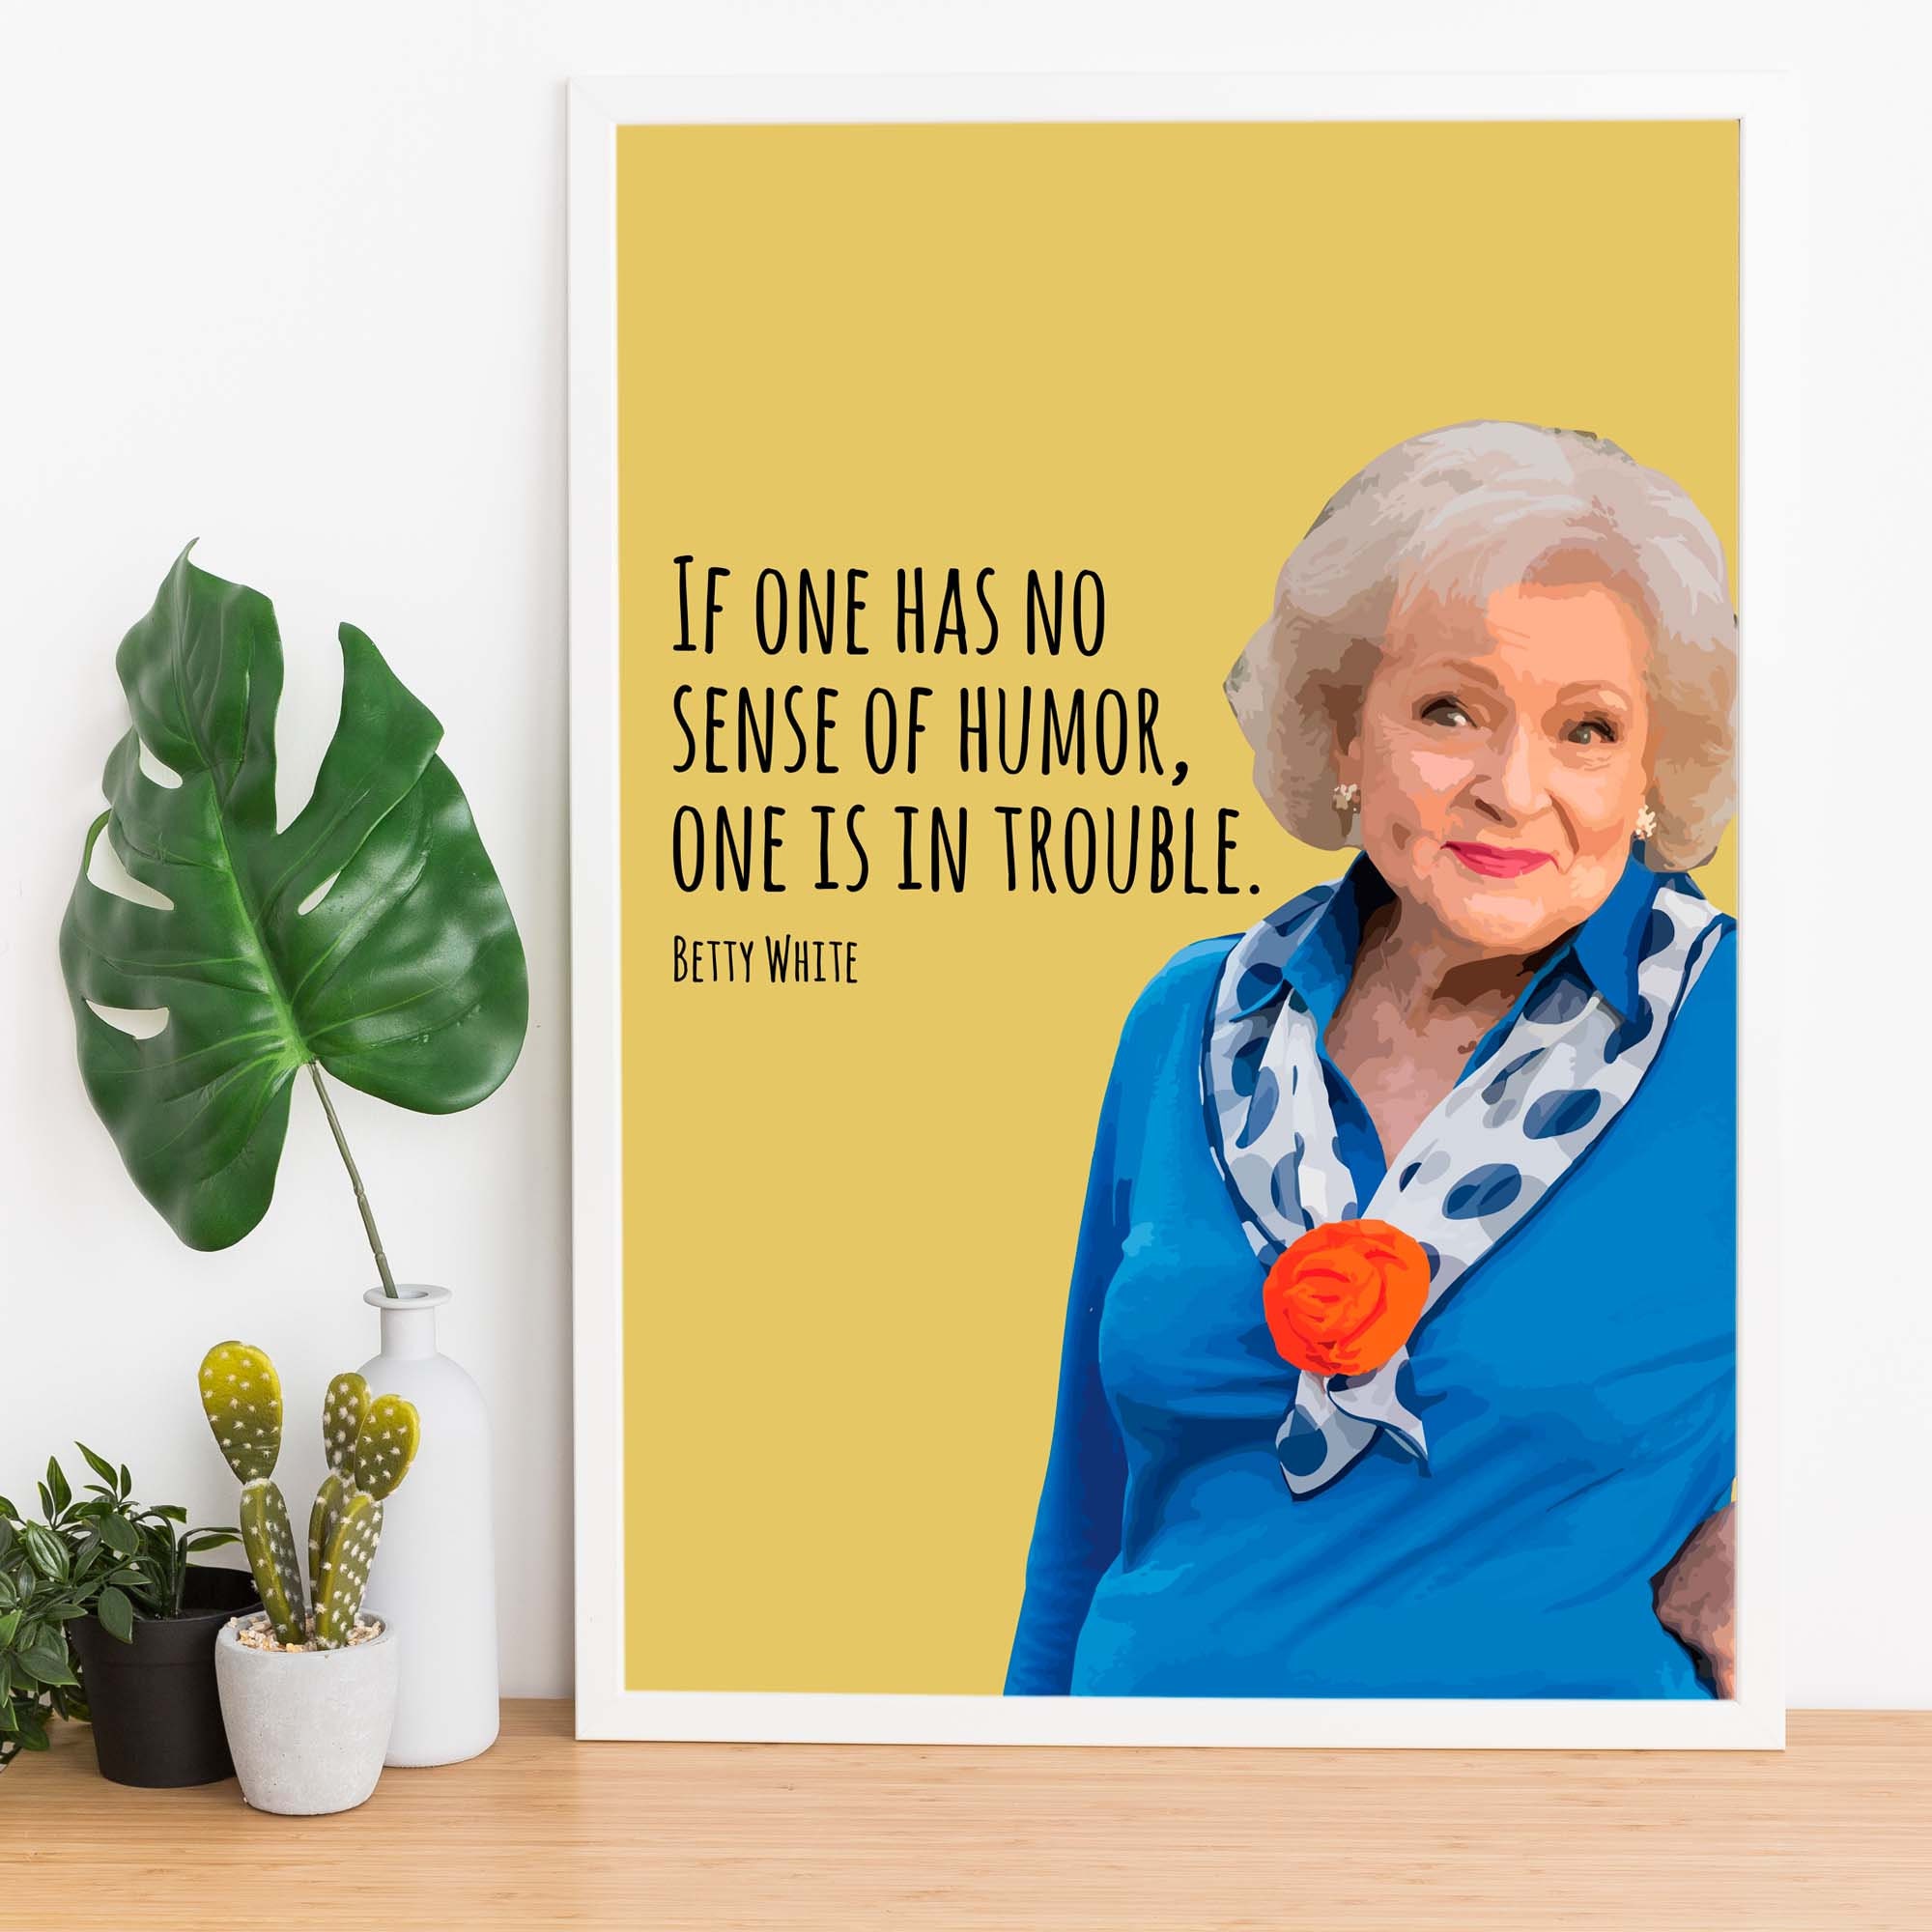 Discover Betty White | If One Has No Sense of Humor, One is in Trouble